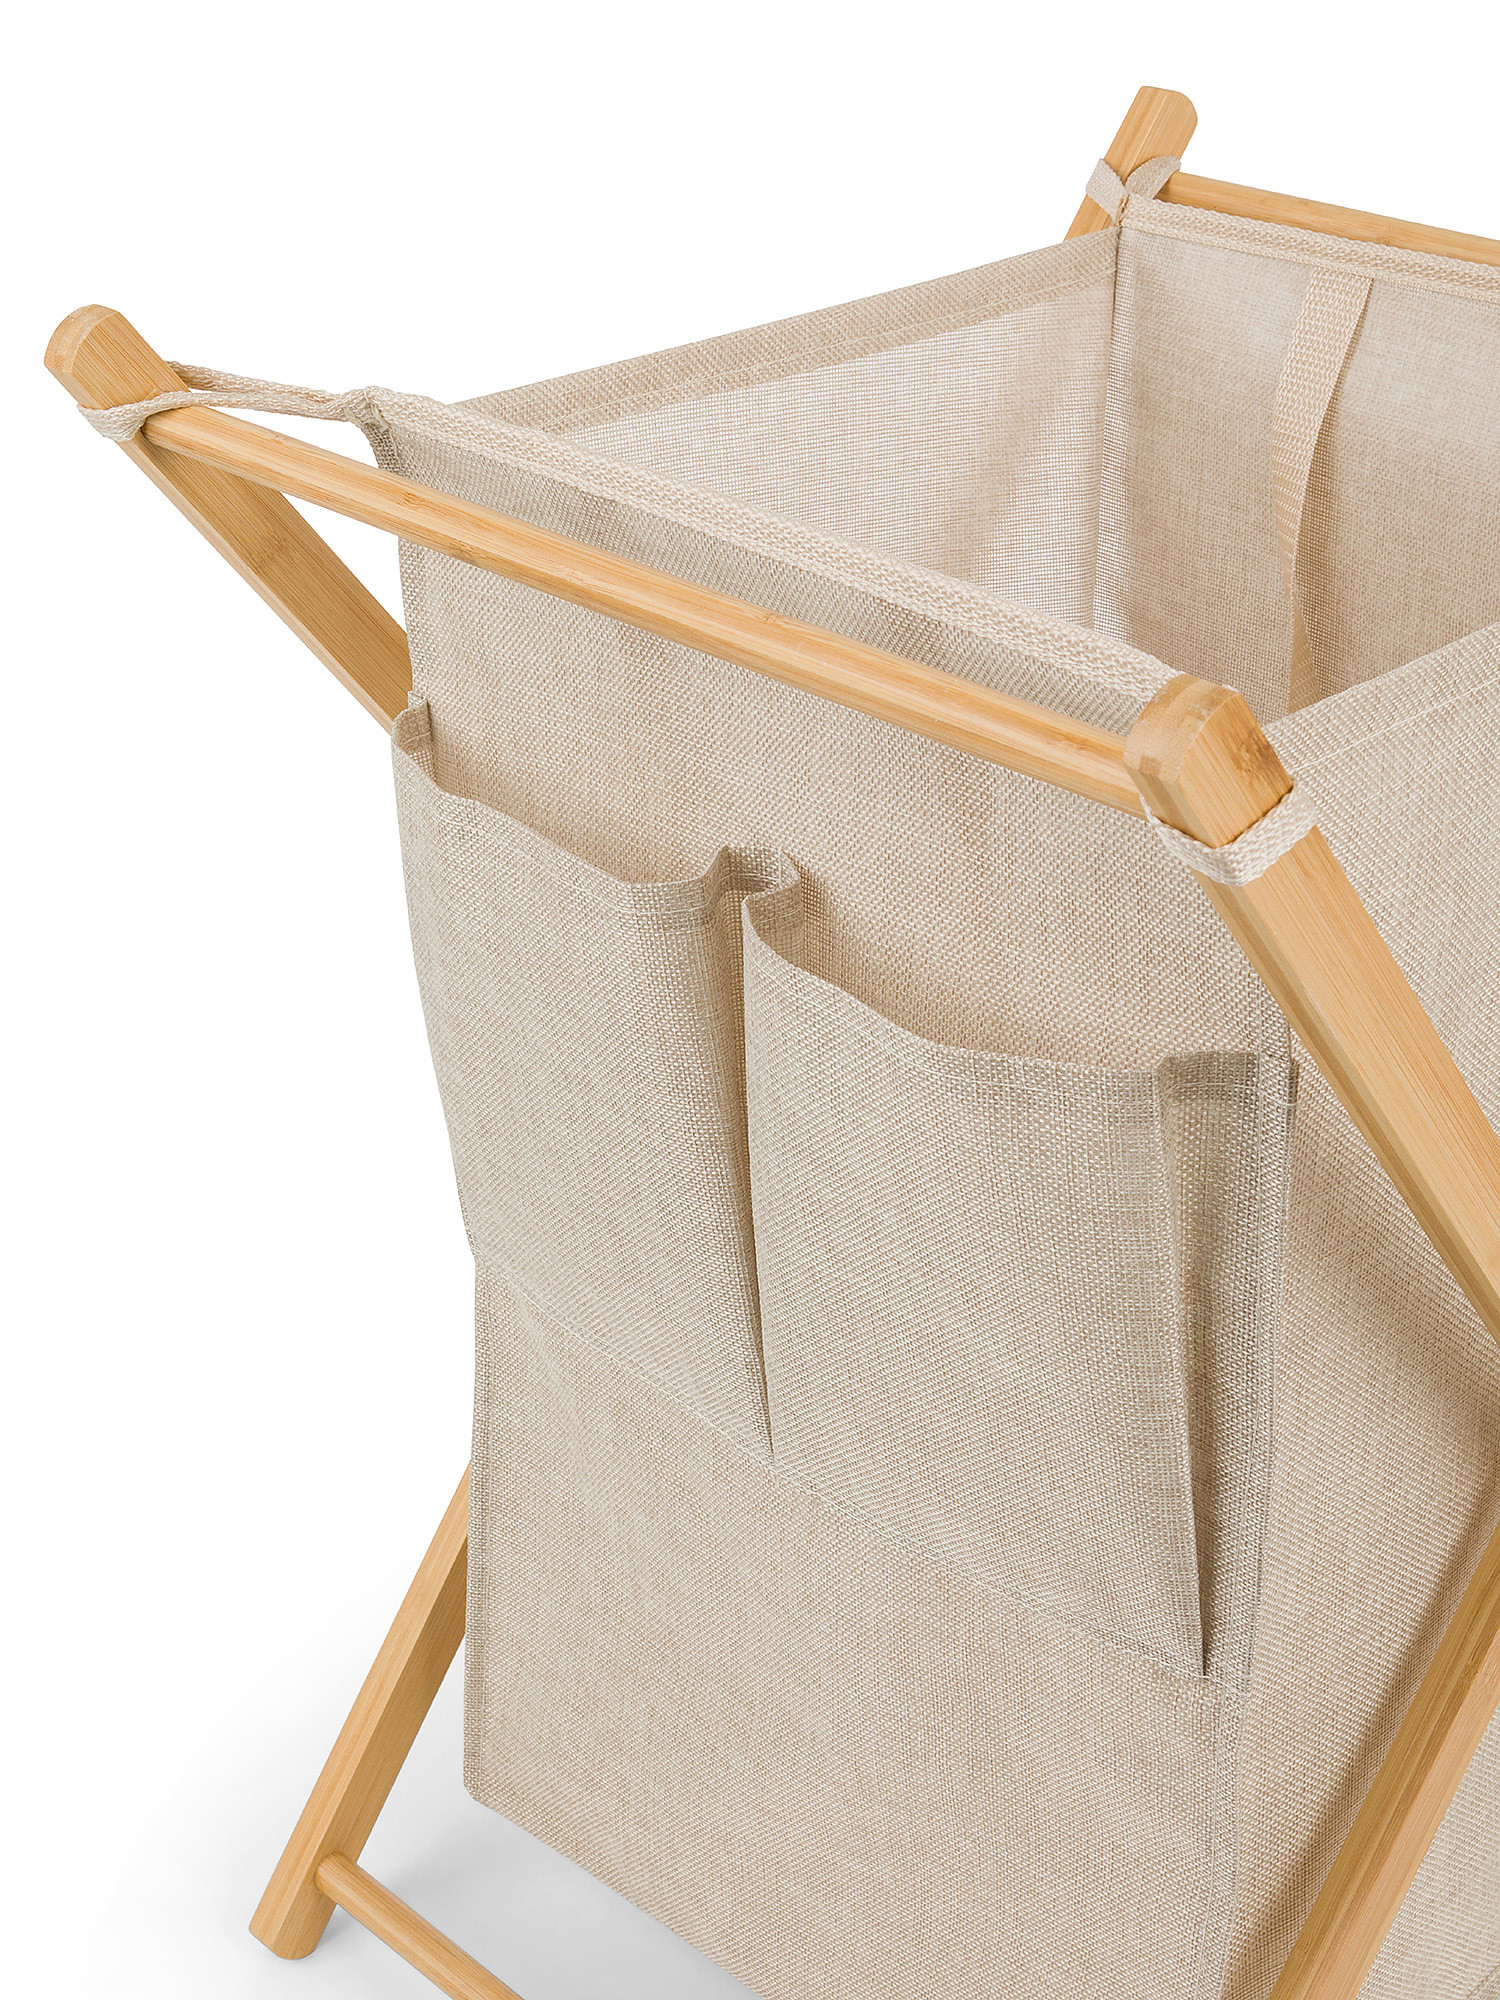 Woven and bamboo laundry basket, Beige, large image number 1